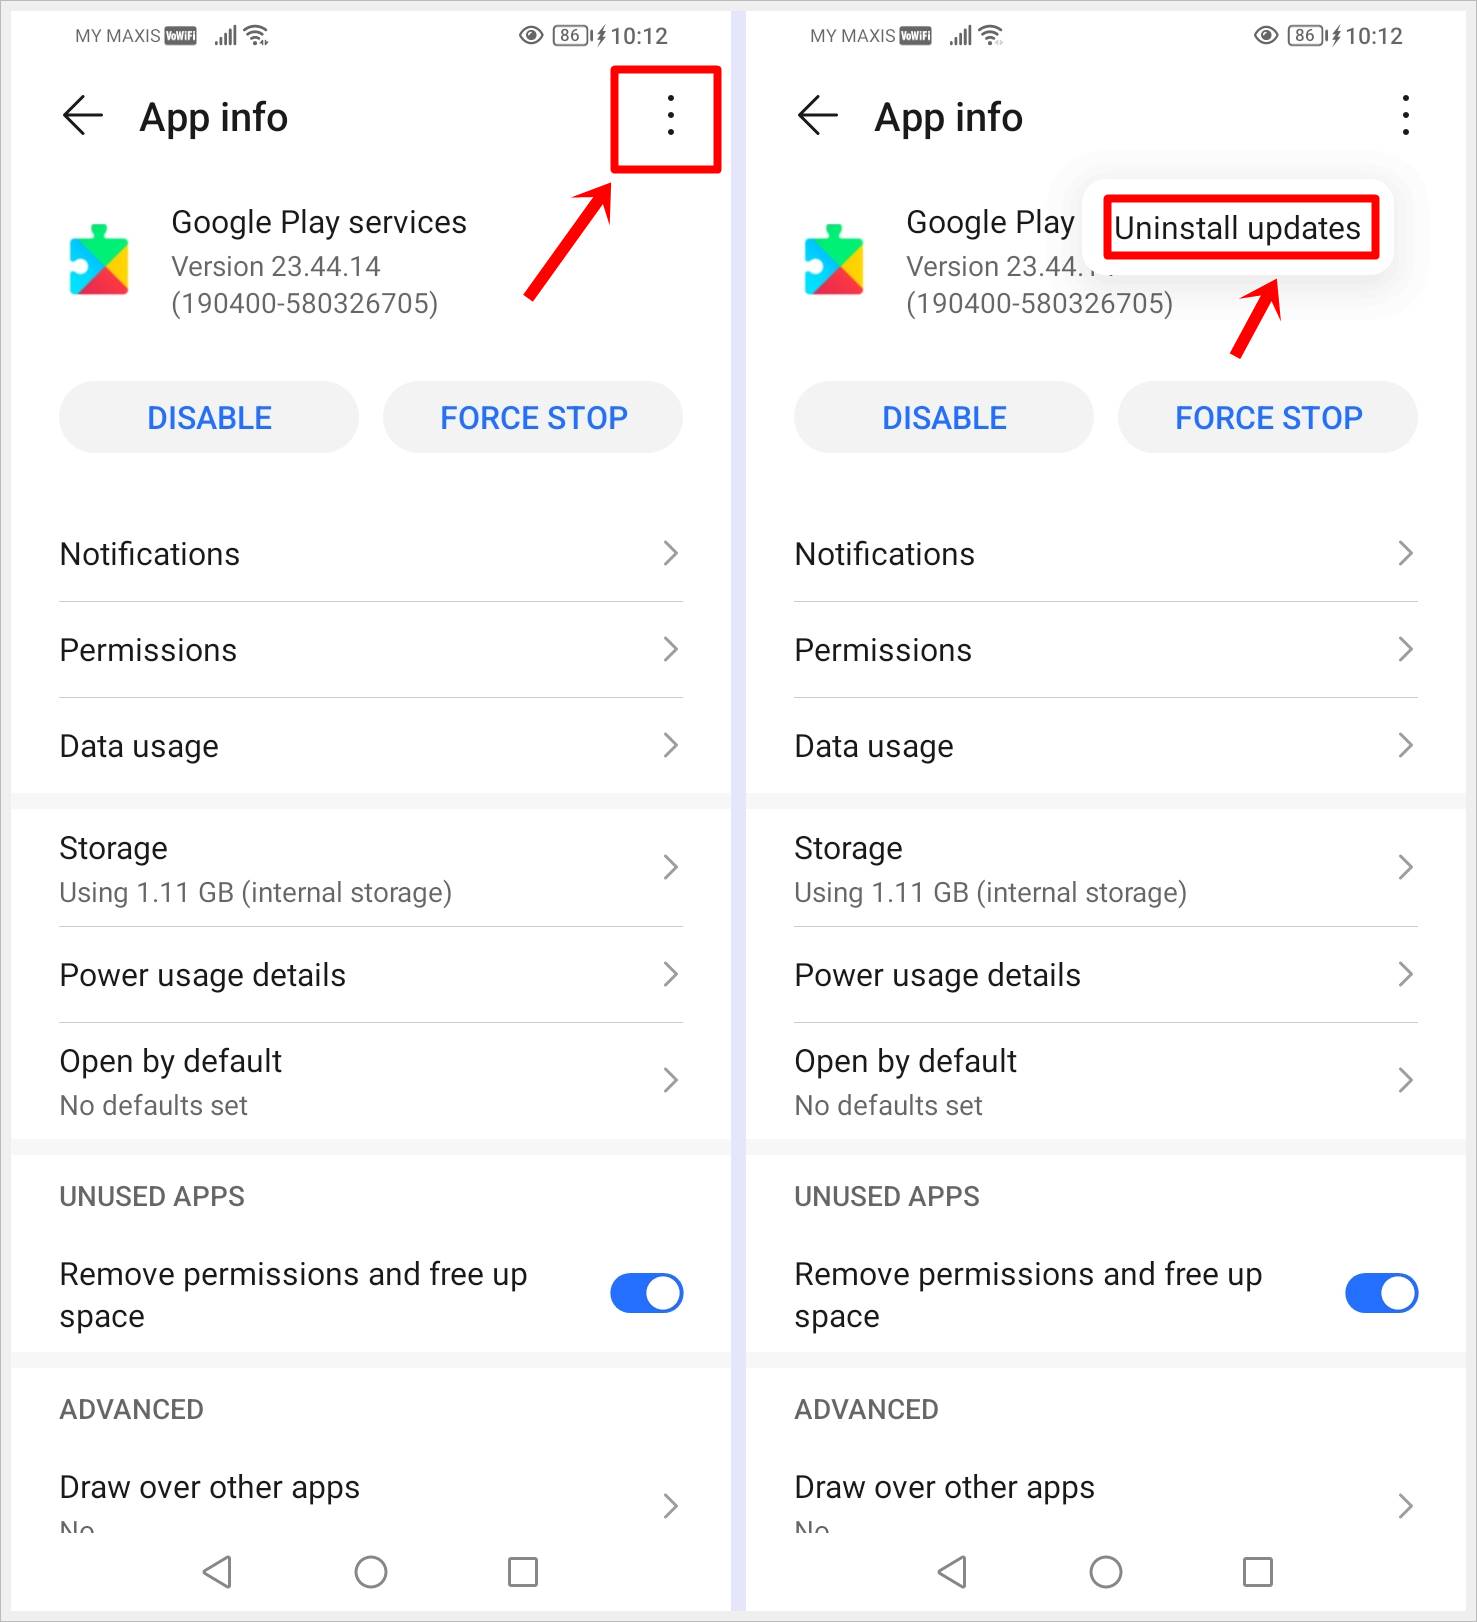 How to Fix "Google Play Services Keeps Stopping" Error: This image shows 2 screenshots of the same page: One shows the Google play services app info with the 3-Vertical-Dots in the top-right highlighted, while the other shows the same page with the "Uninstall updates" option highlighted.